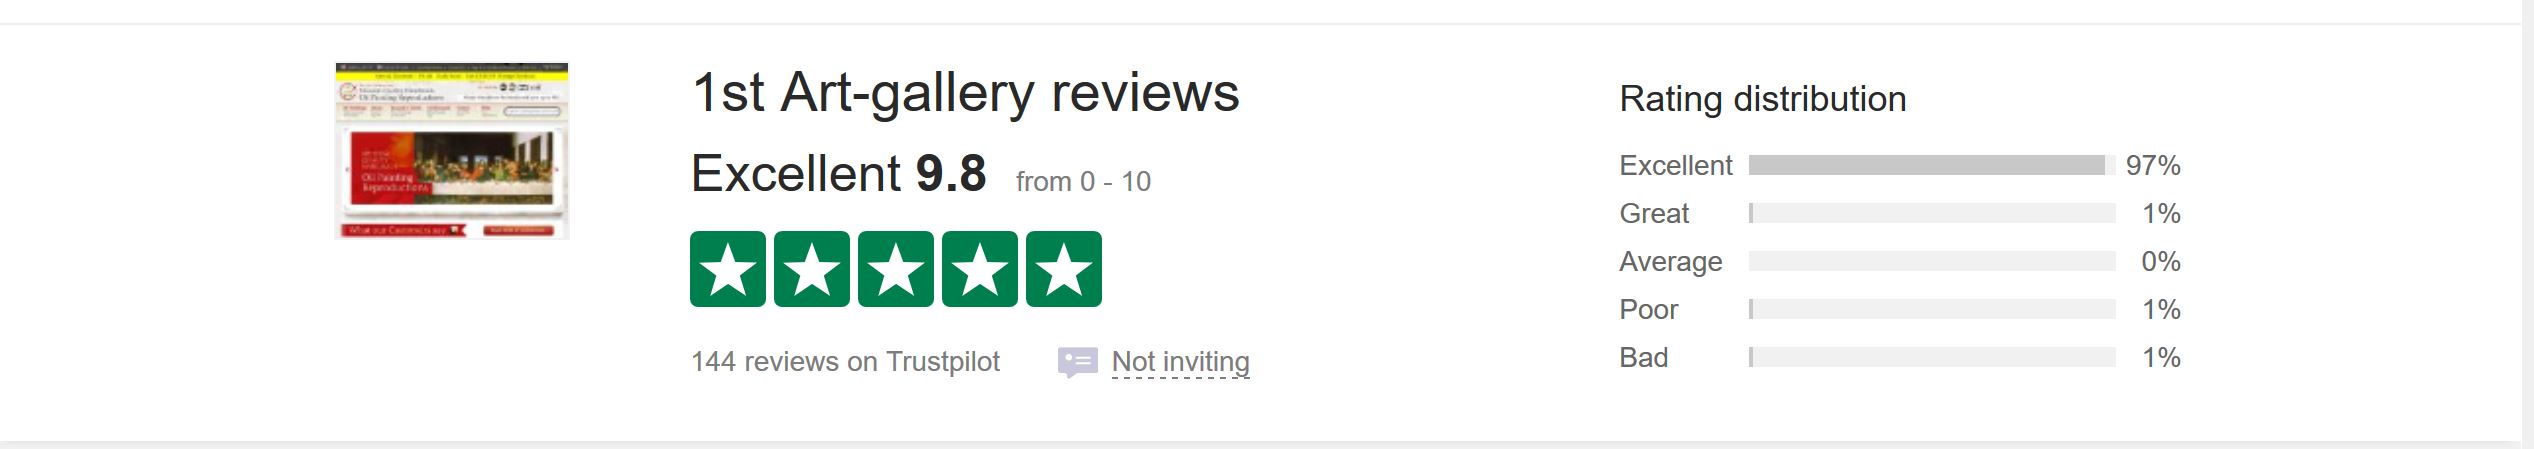 9.8/10 rating when reviews cannot be faked.